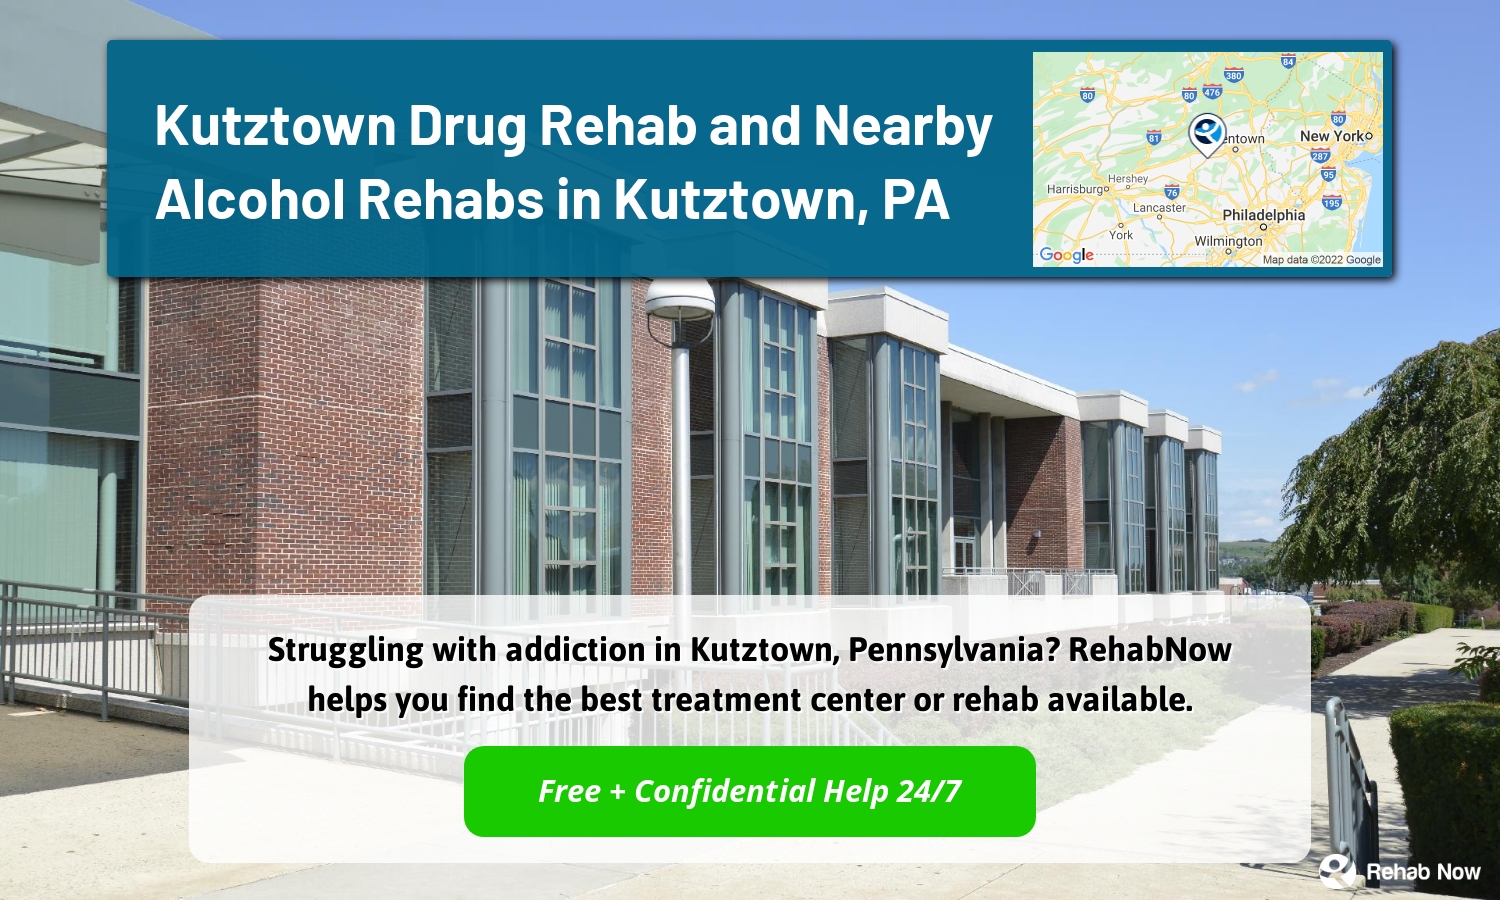 Struggling with addiction in Kutztown, Pennsylvania? RehabNow helps you find the best treatment center or rehab available.